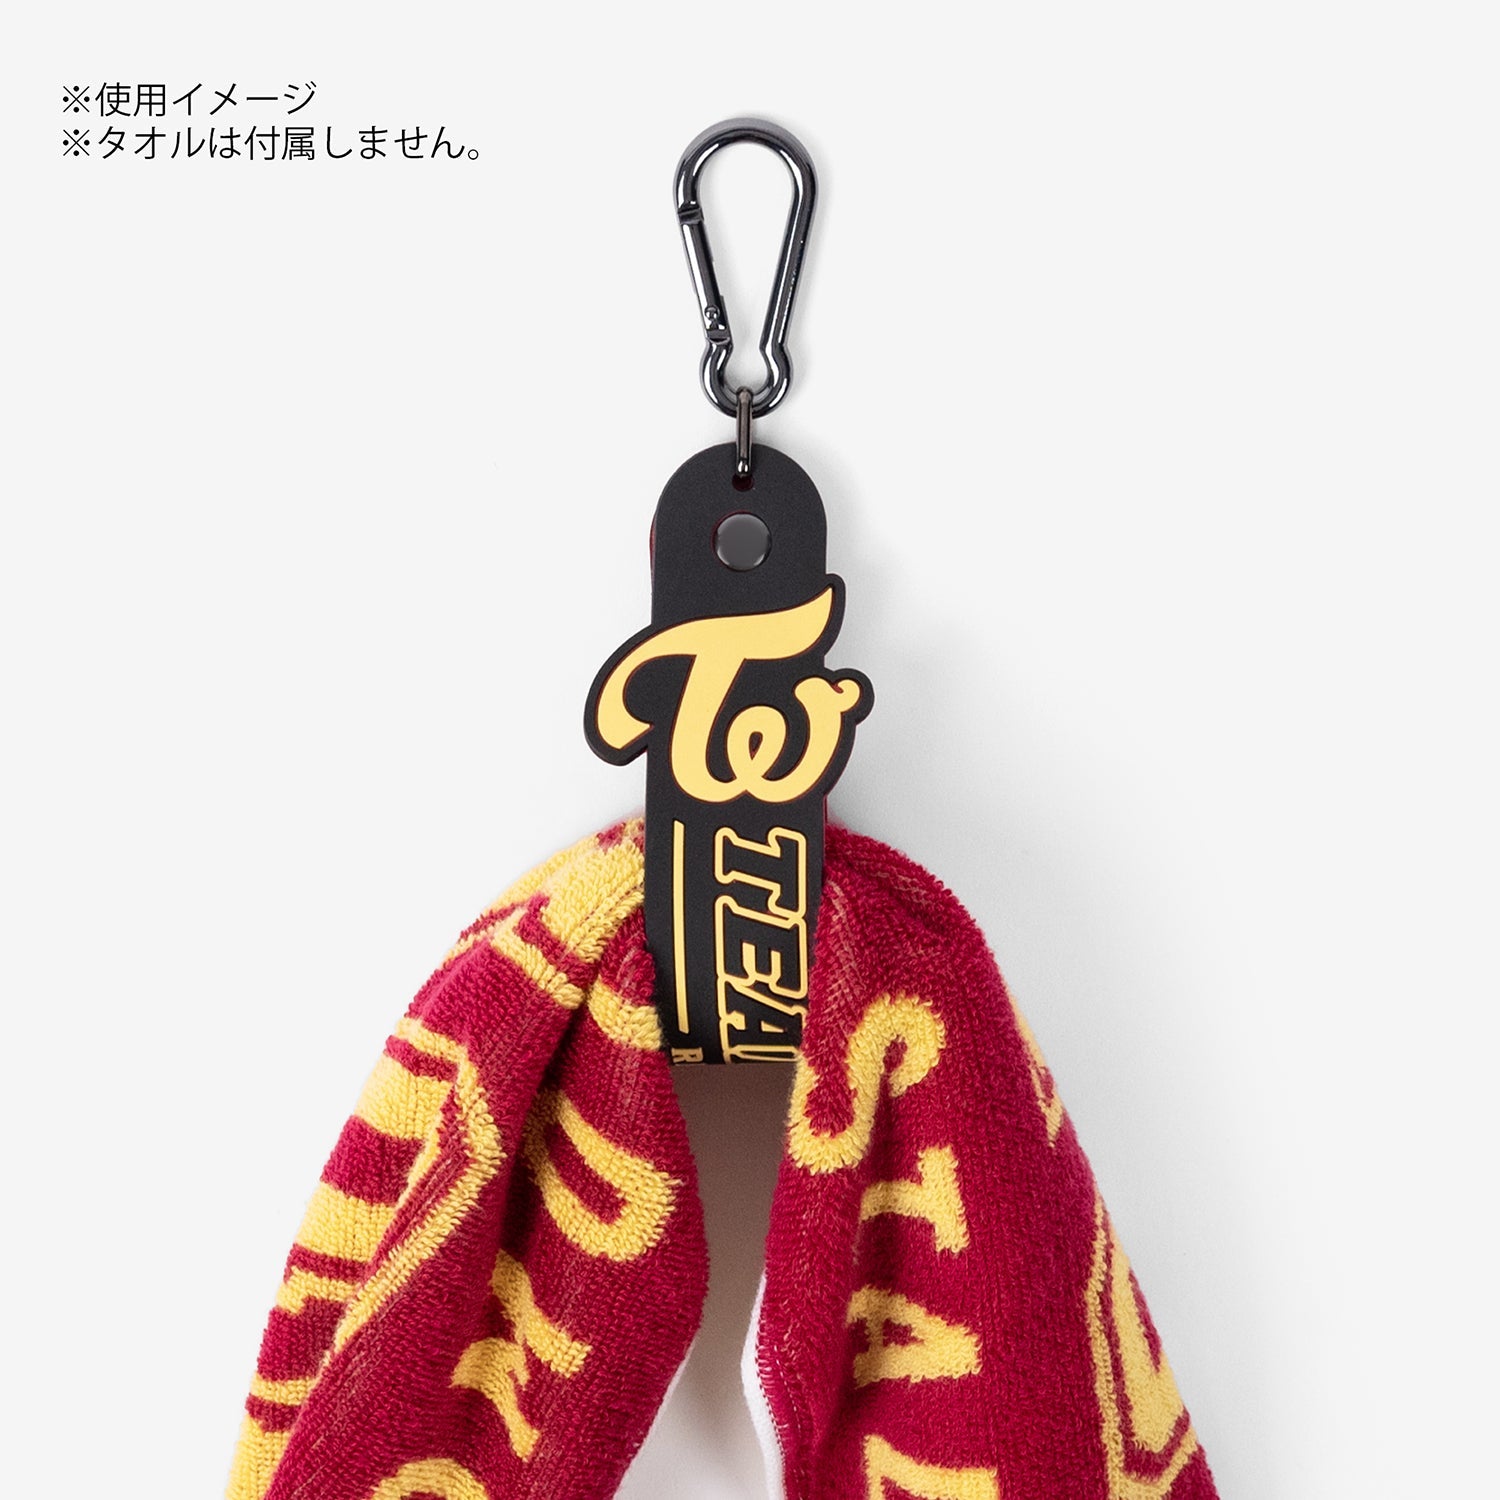 TOWEL HOLDER / TWICE『READY TO BE SPECIAL』